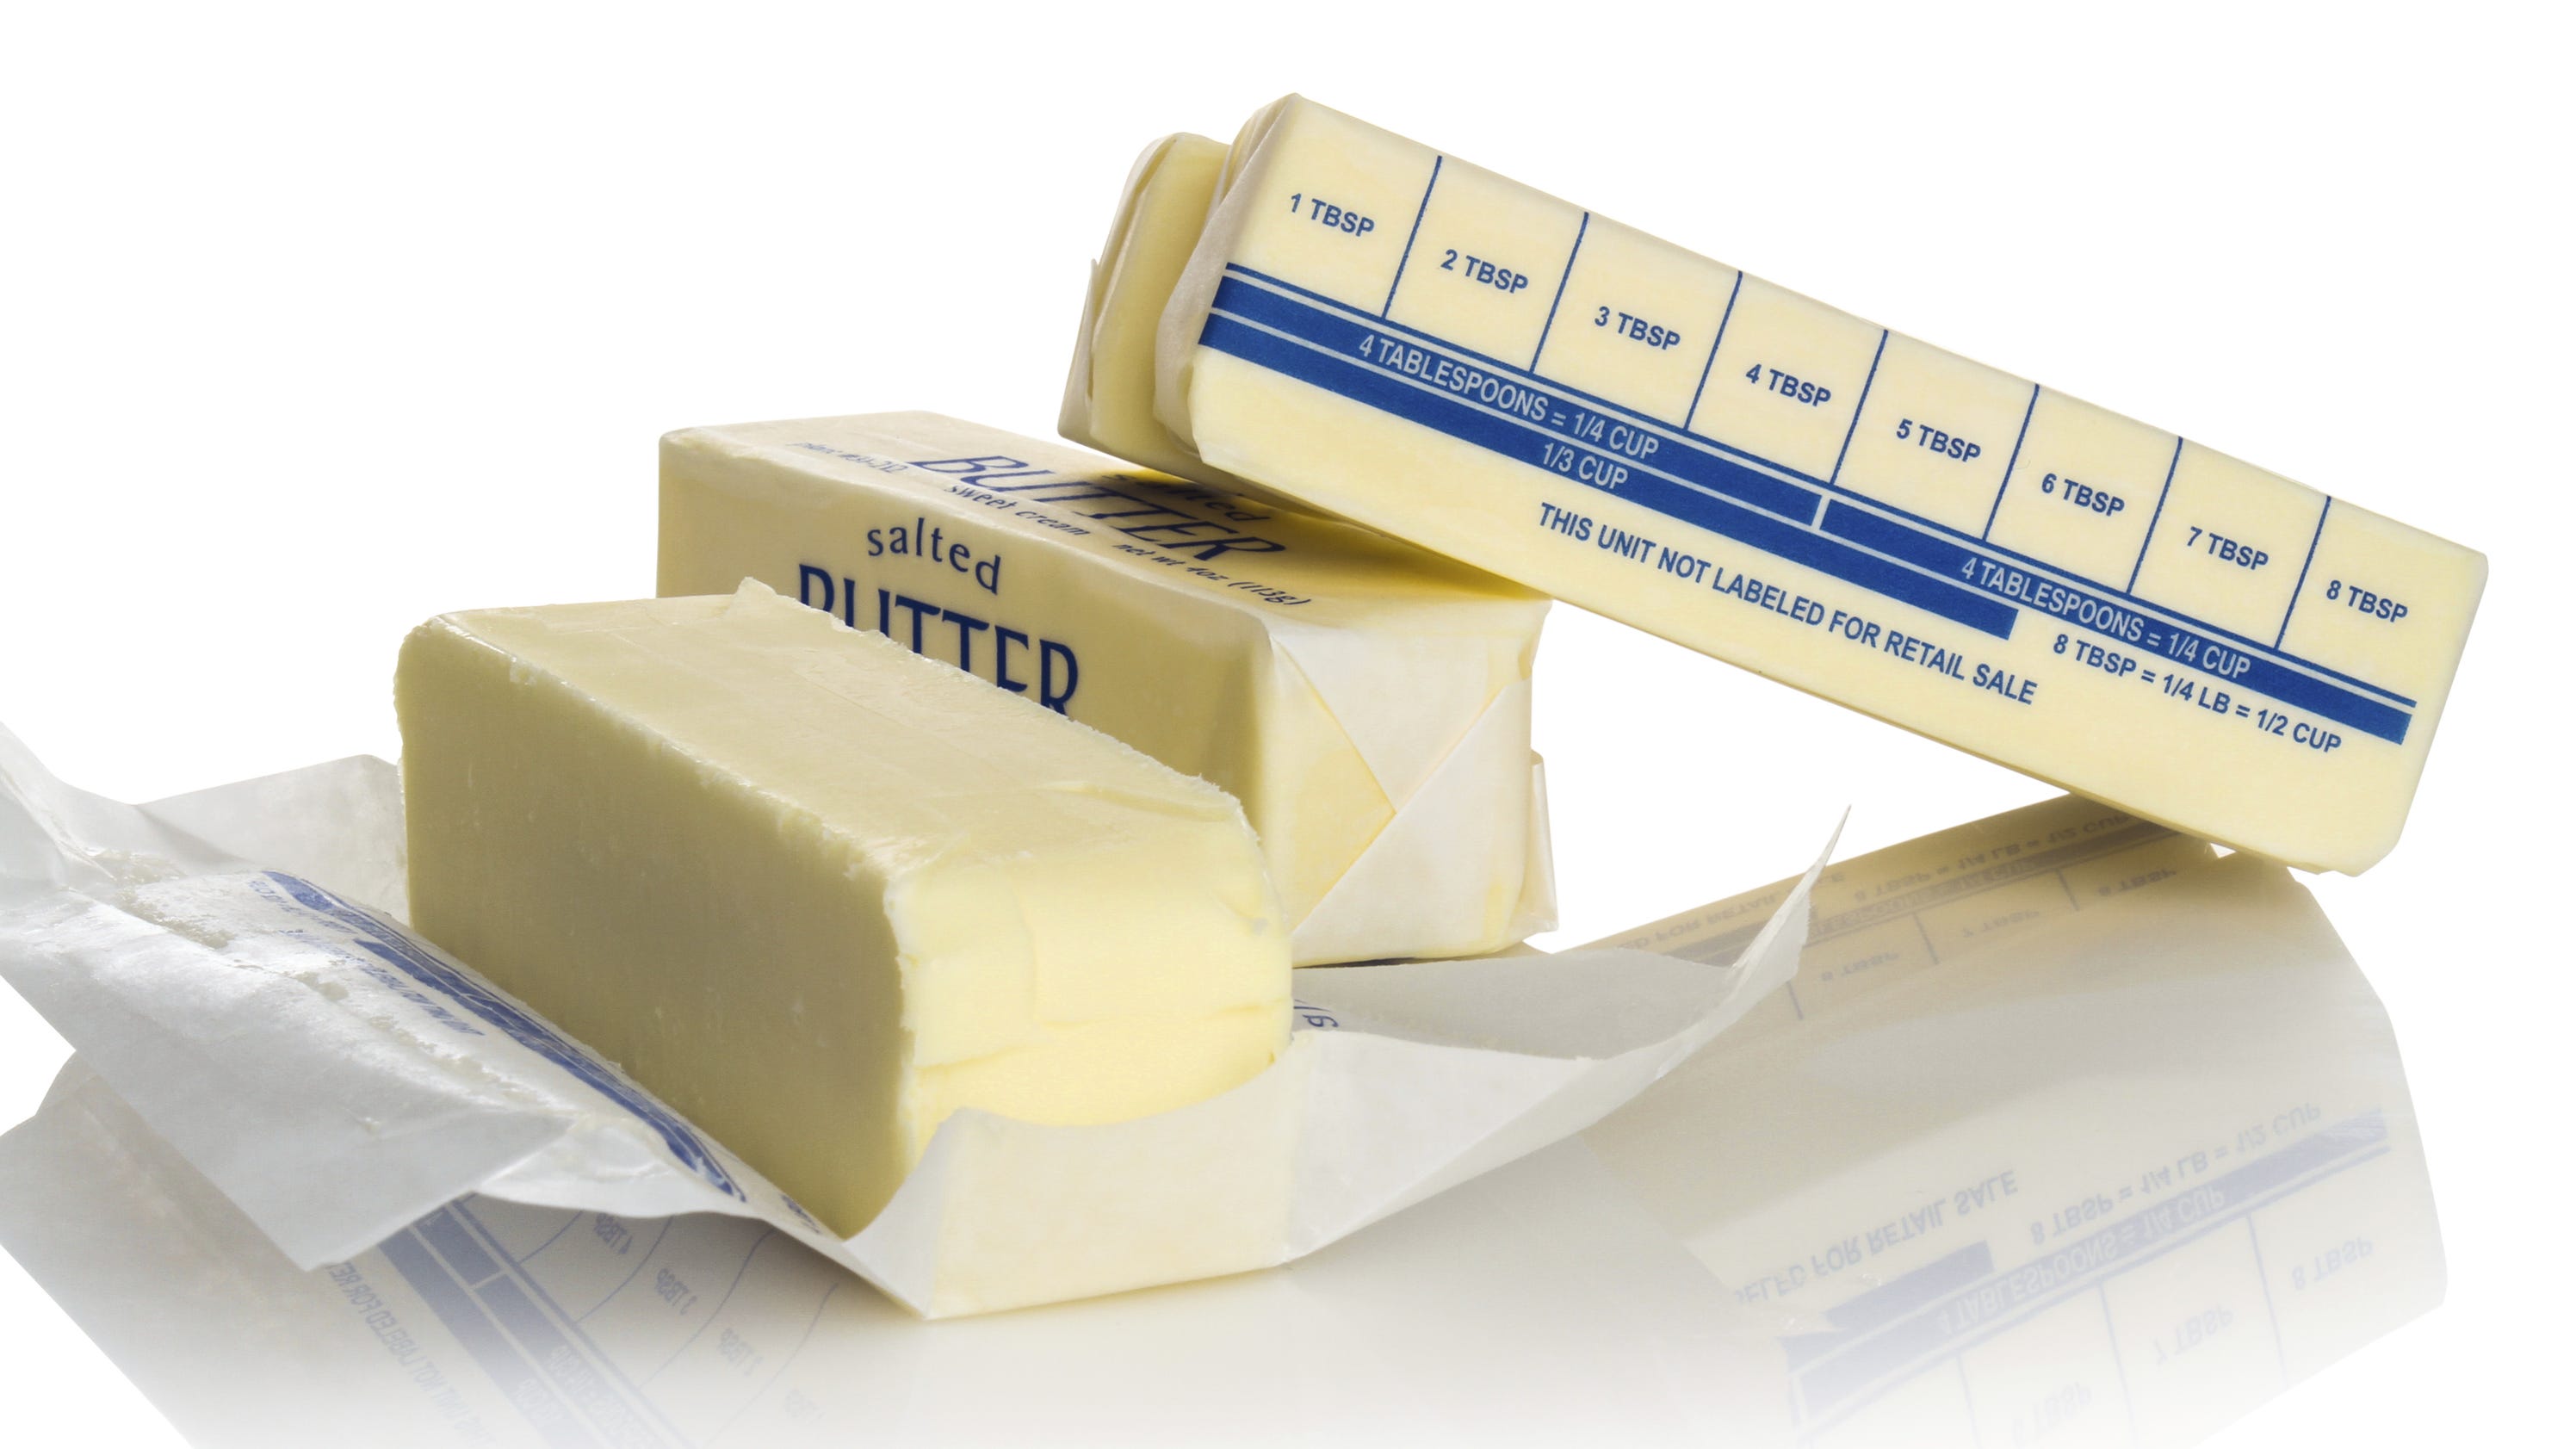 14.1875 grams of butter equal 1 tablespoon. 